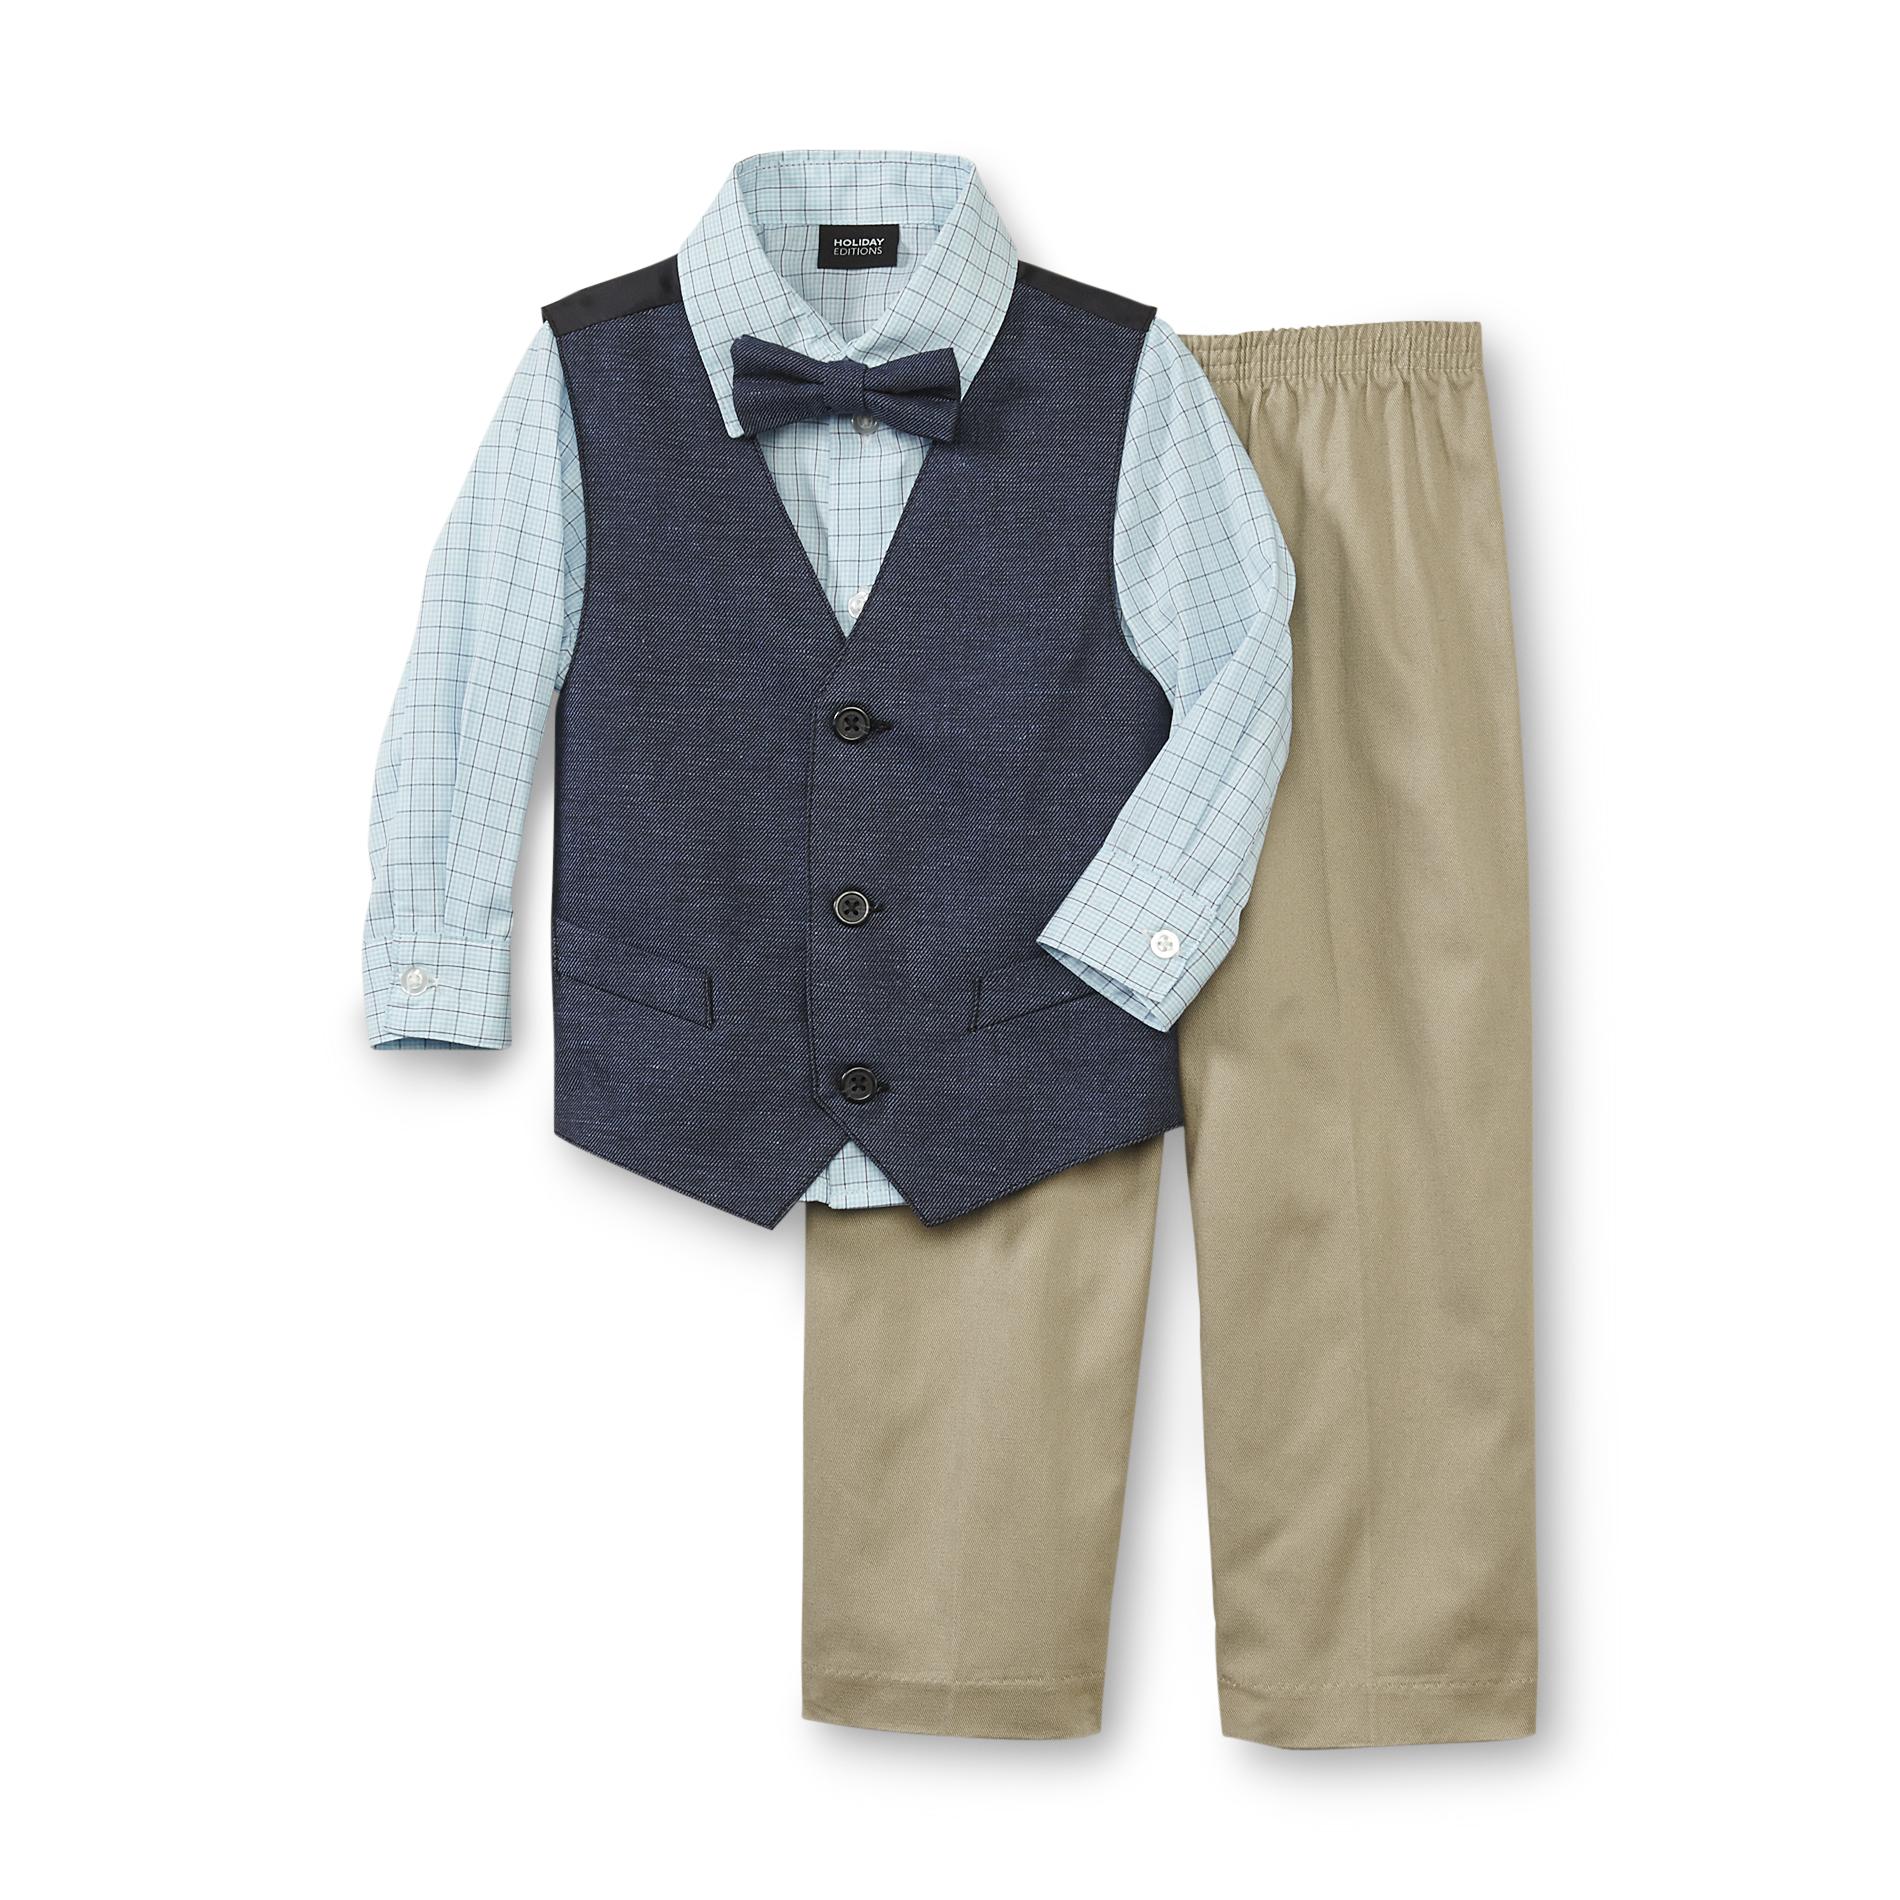 Holiday Editions Infant & Toddler Boy's Shirt  Vest  Bow Tie & Pants